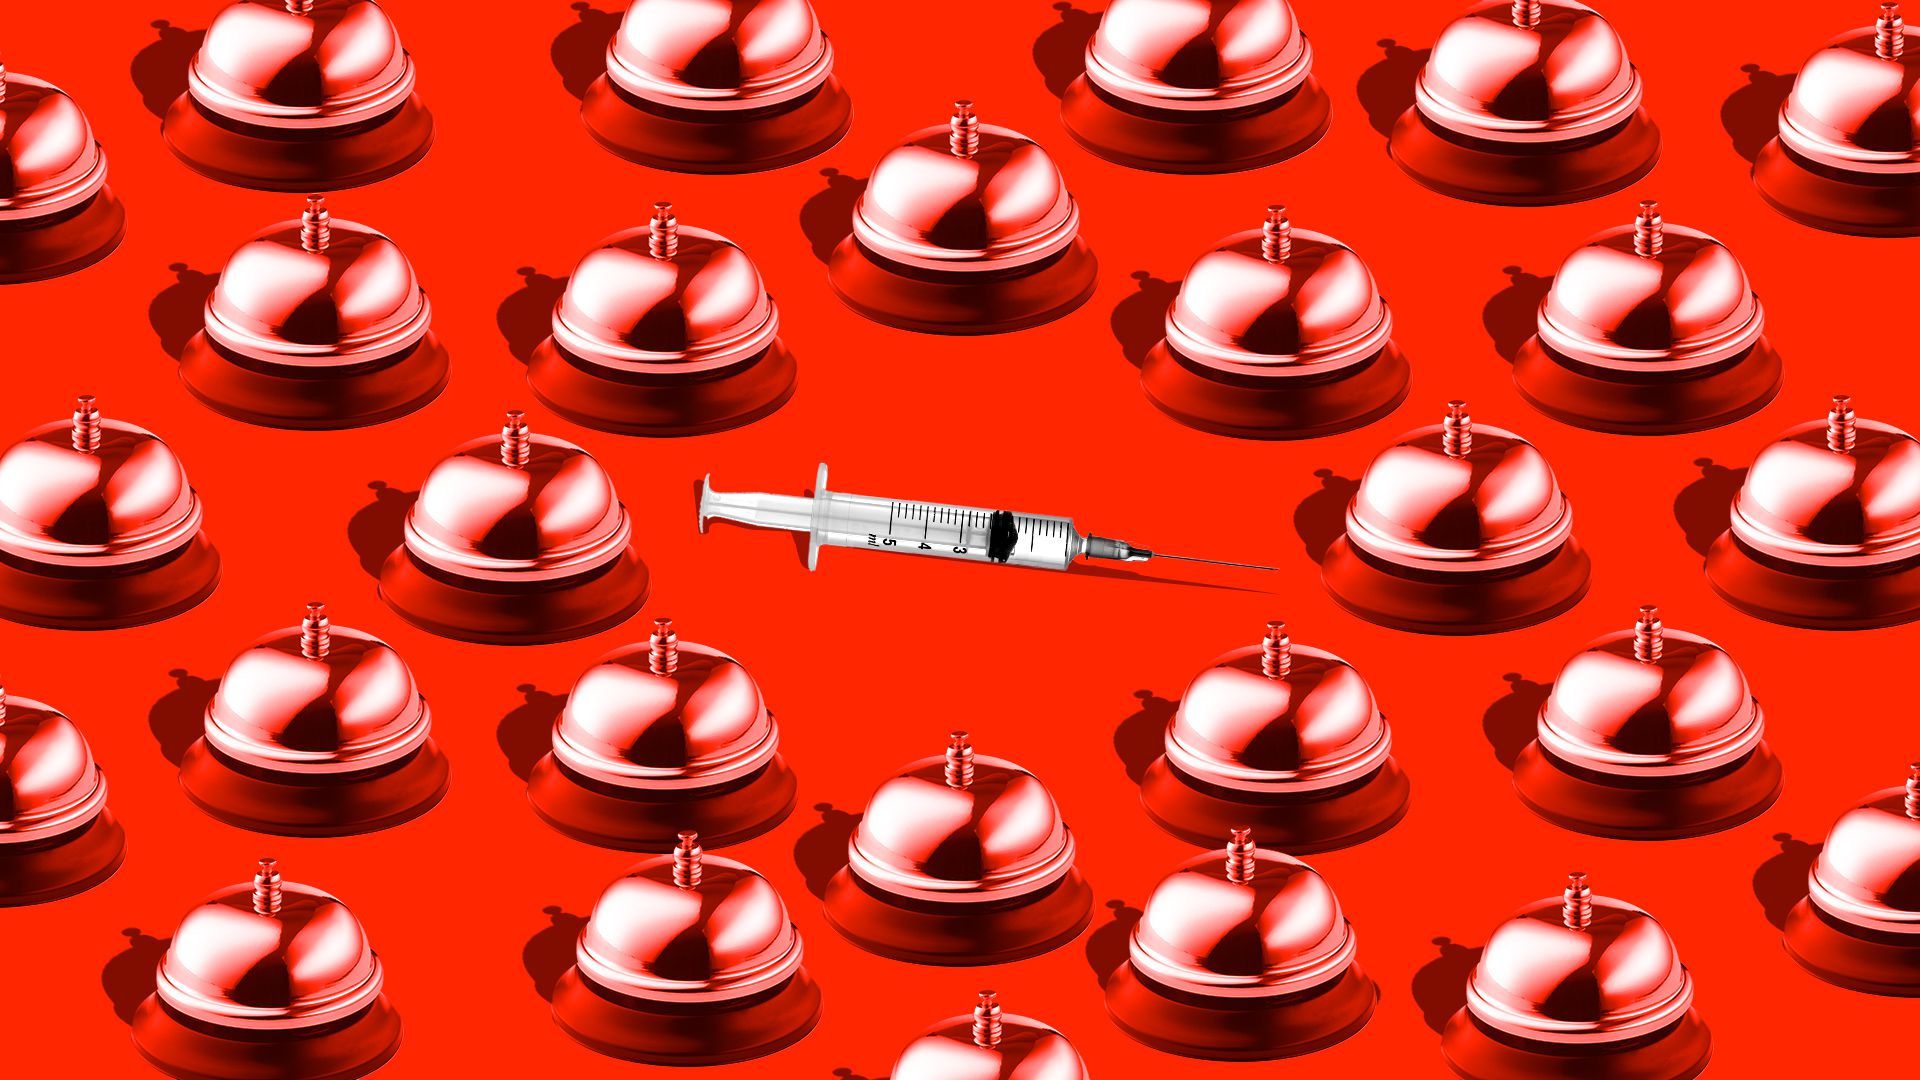 Illustration of a syringe surrounded by service bells. 